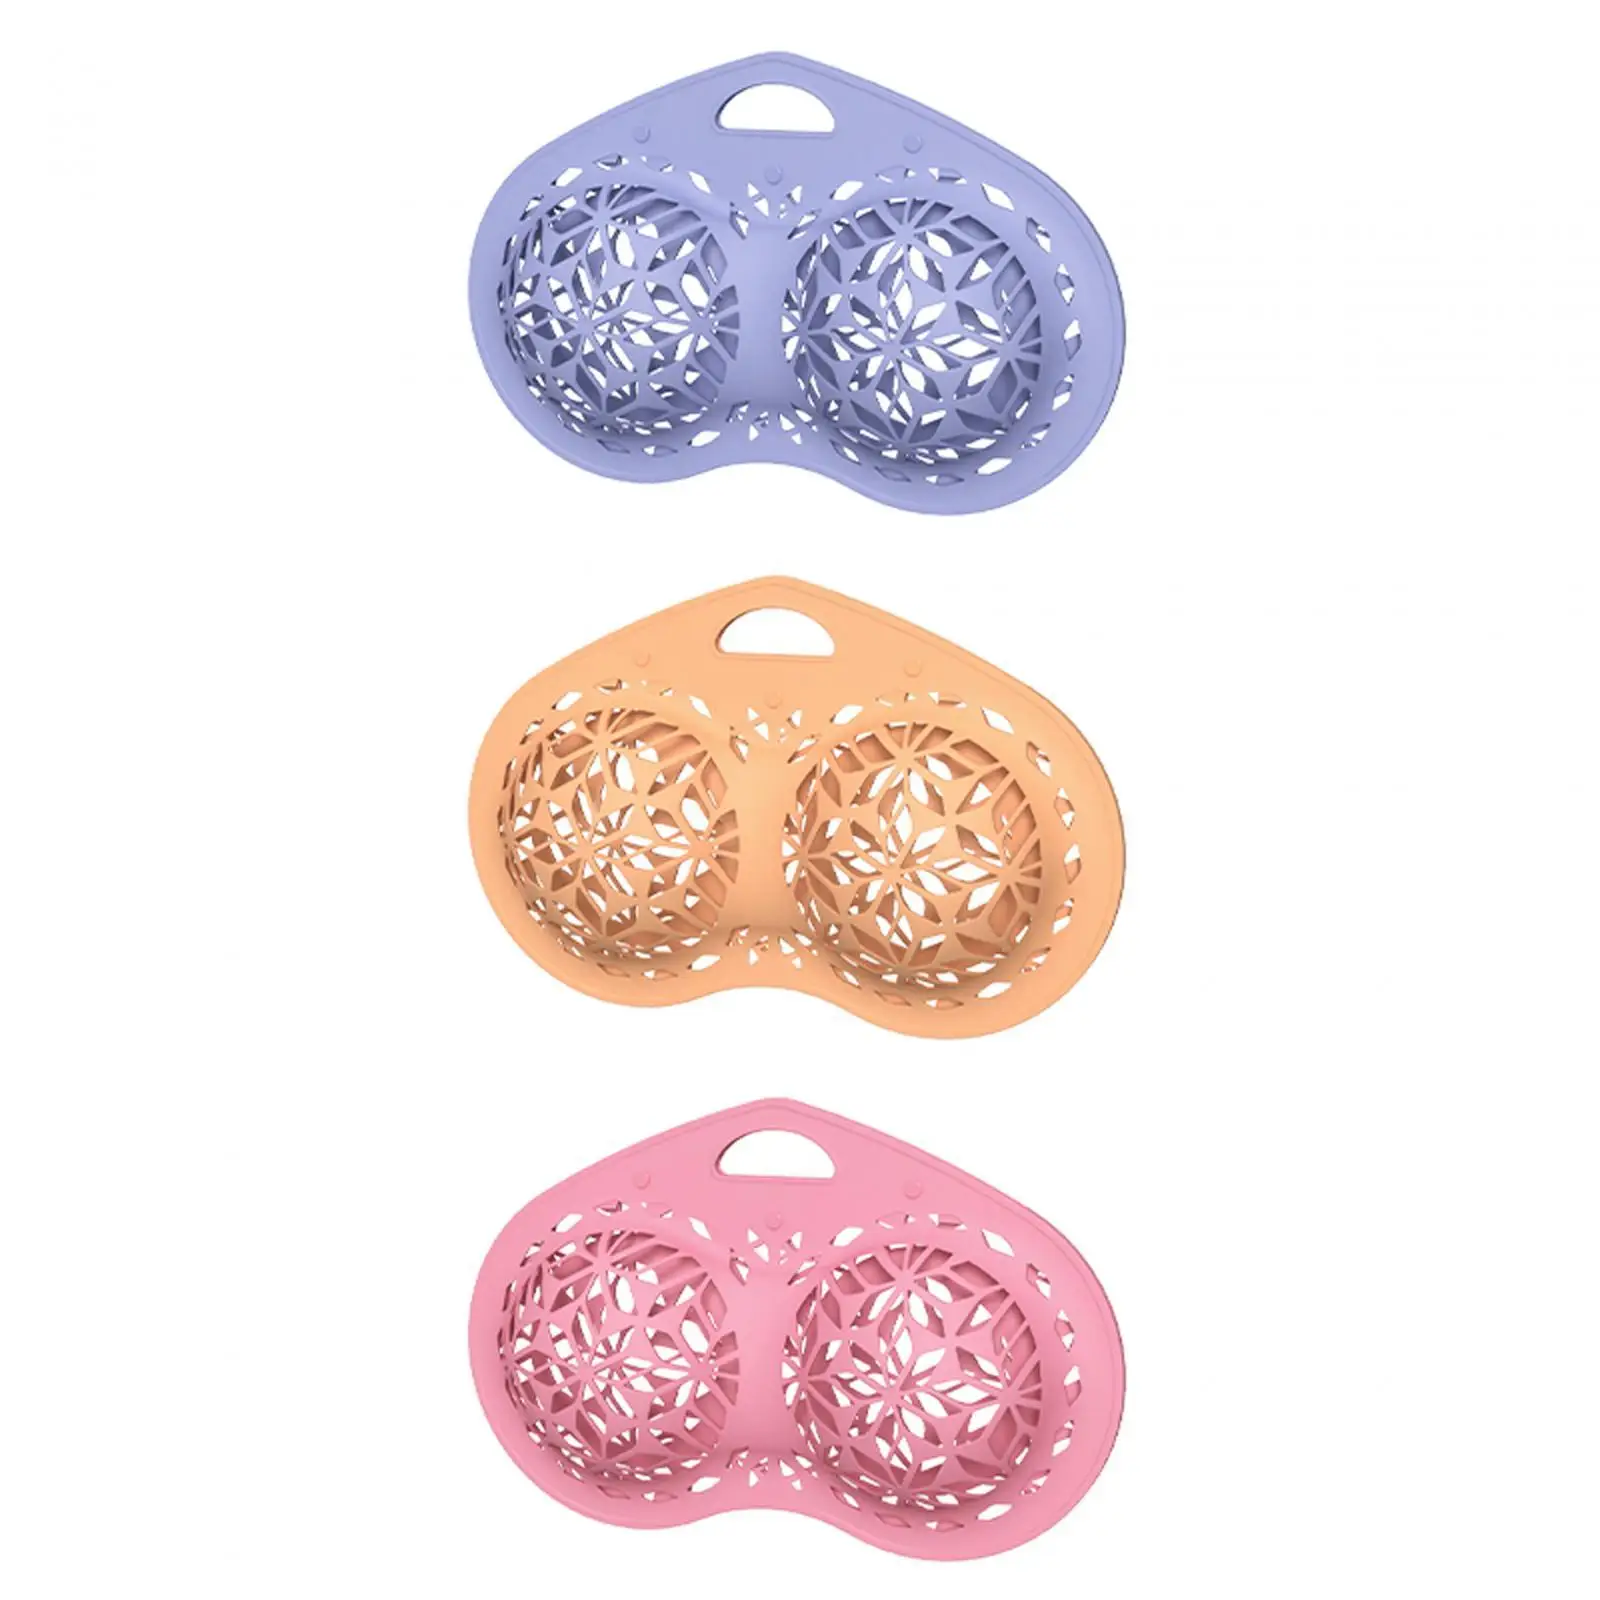 Silicone Bra Washing Bag Silicone Bra Laundry Bag Lightweight Travel Wash Bag for Underwear Sports Bras Panties Clothes Ties